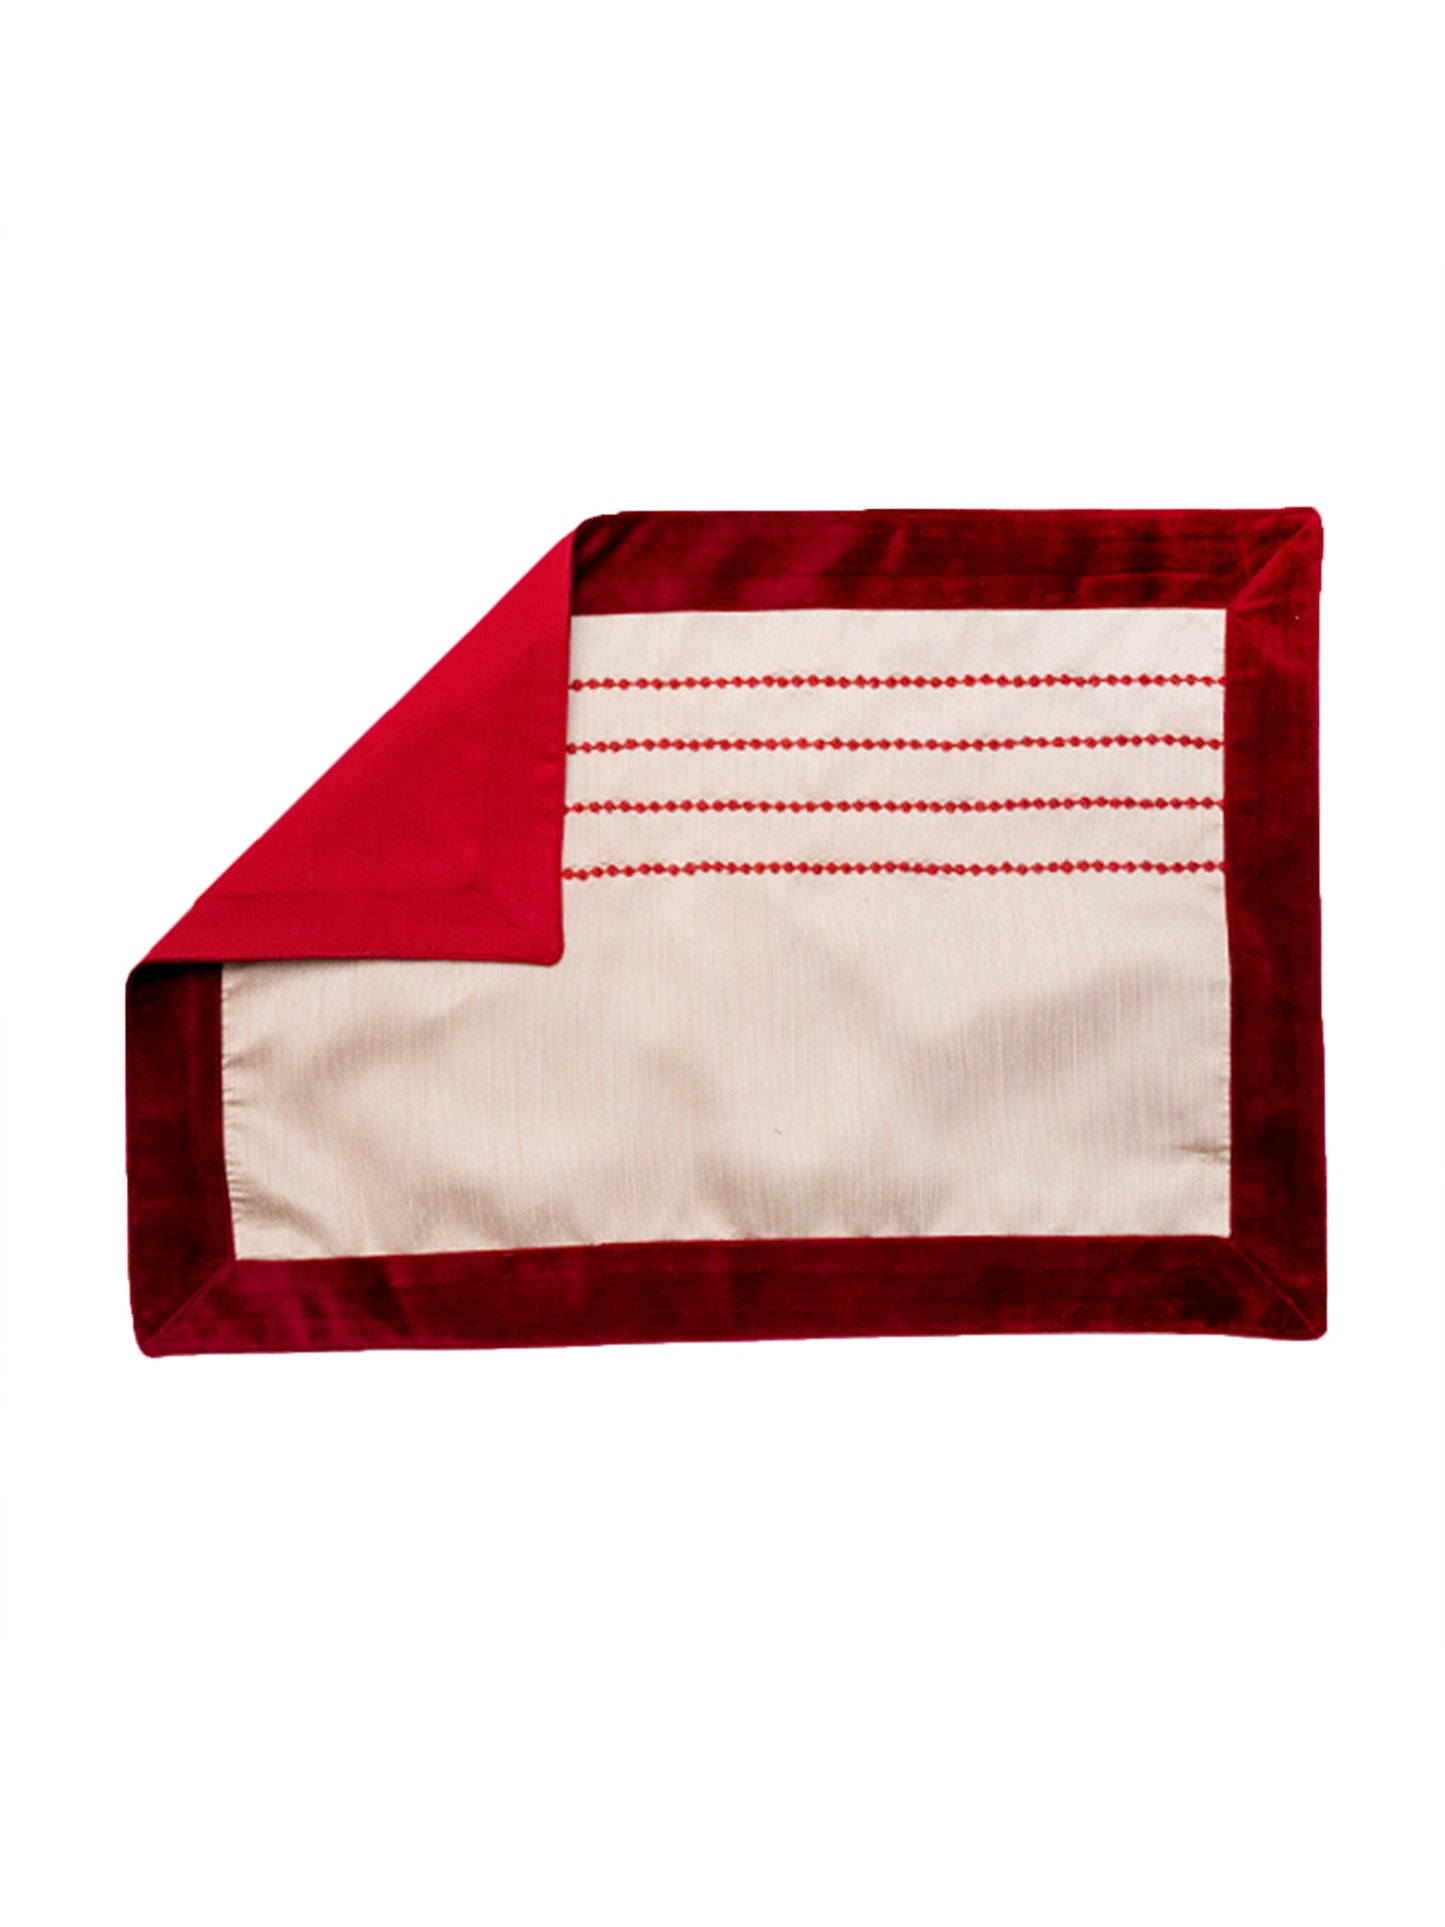 Table Mats and Napkins  Polyester and Cotton Embroidered Cream and Maroon - 13" x 19" ; 16" x 16" - Set of 6